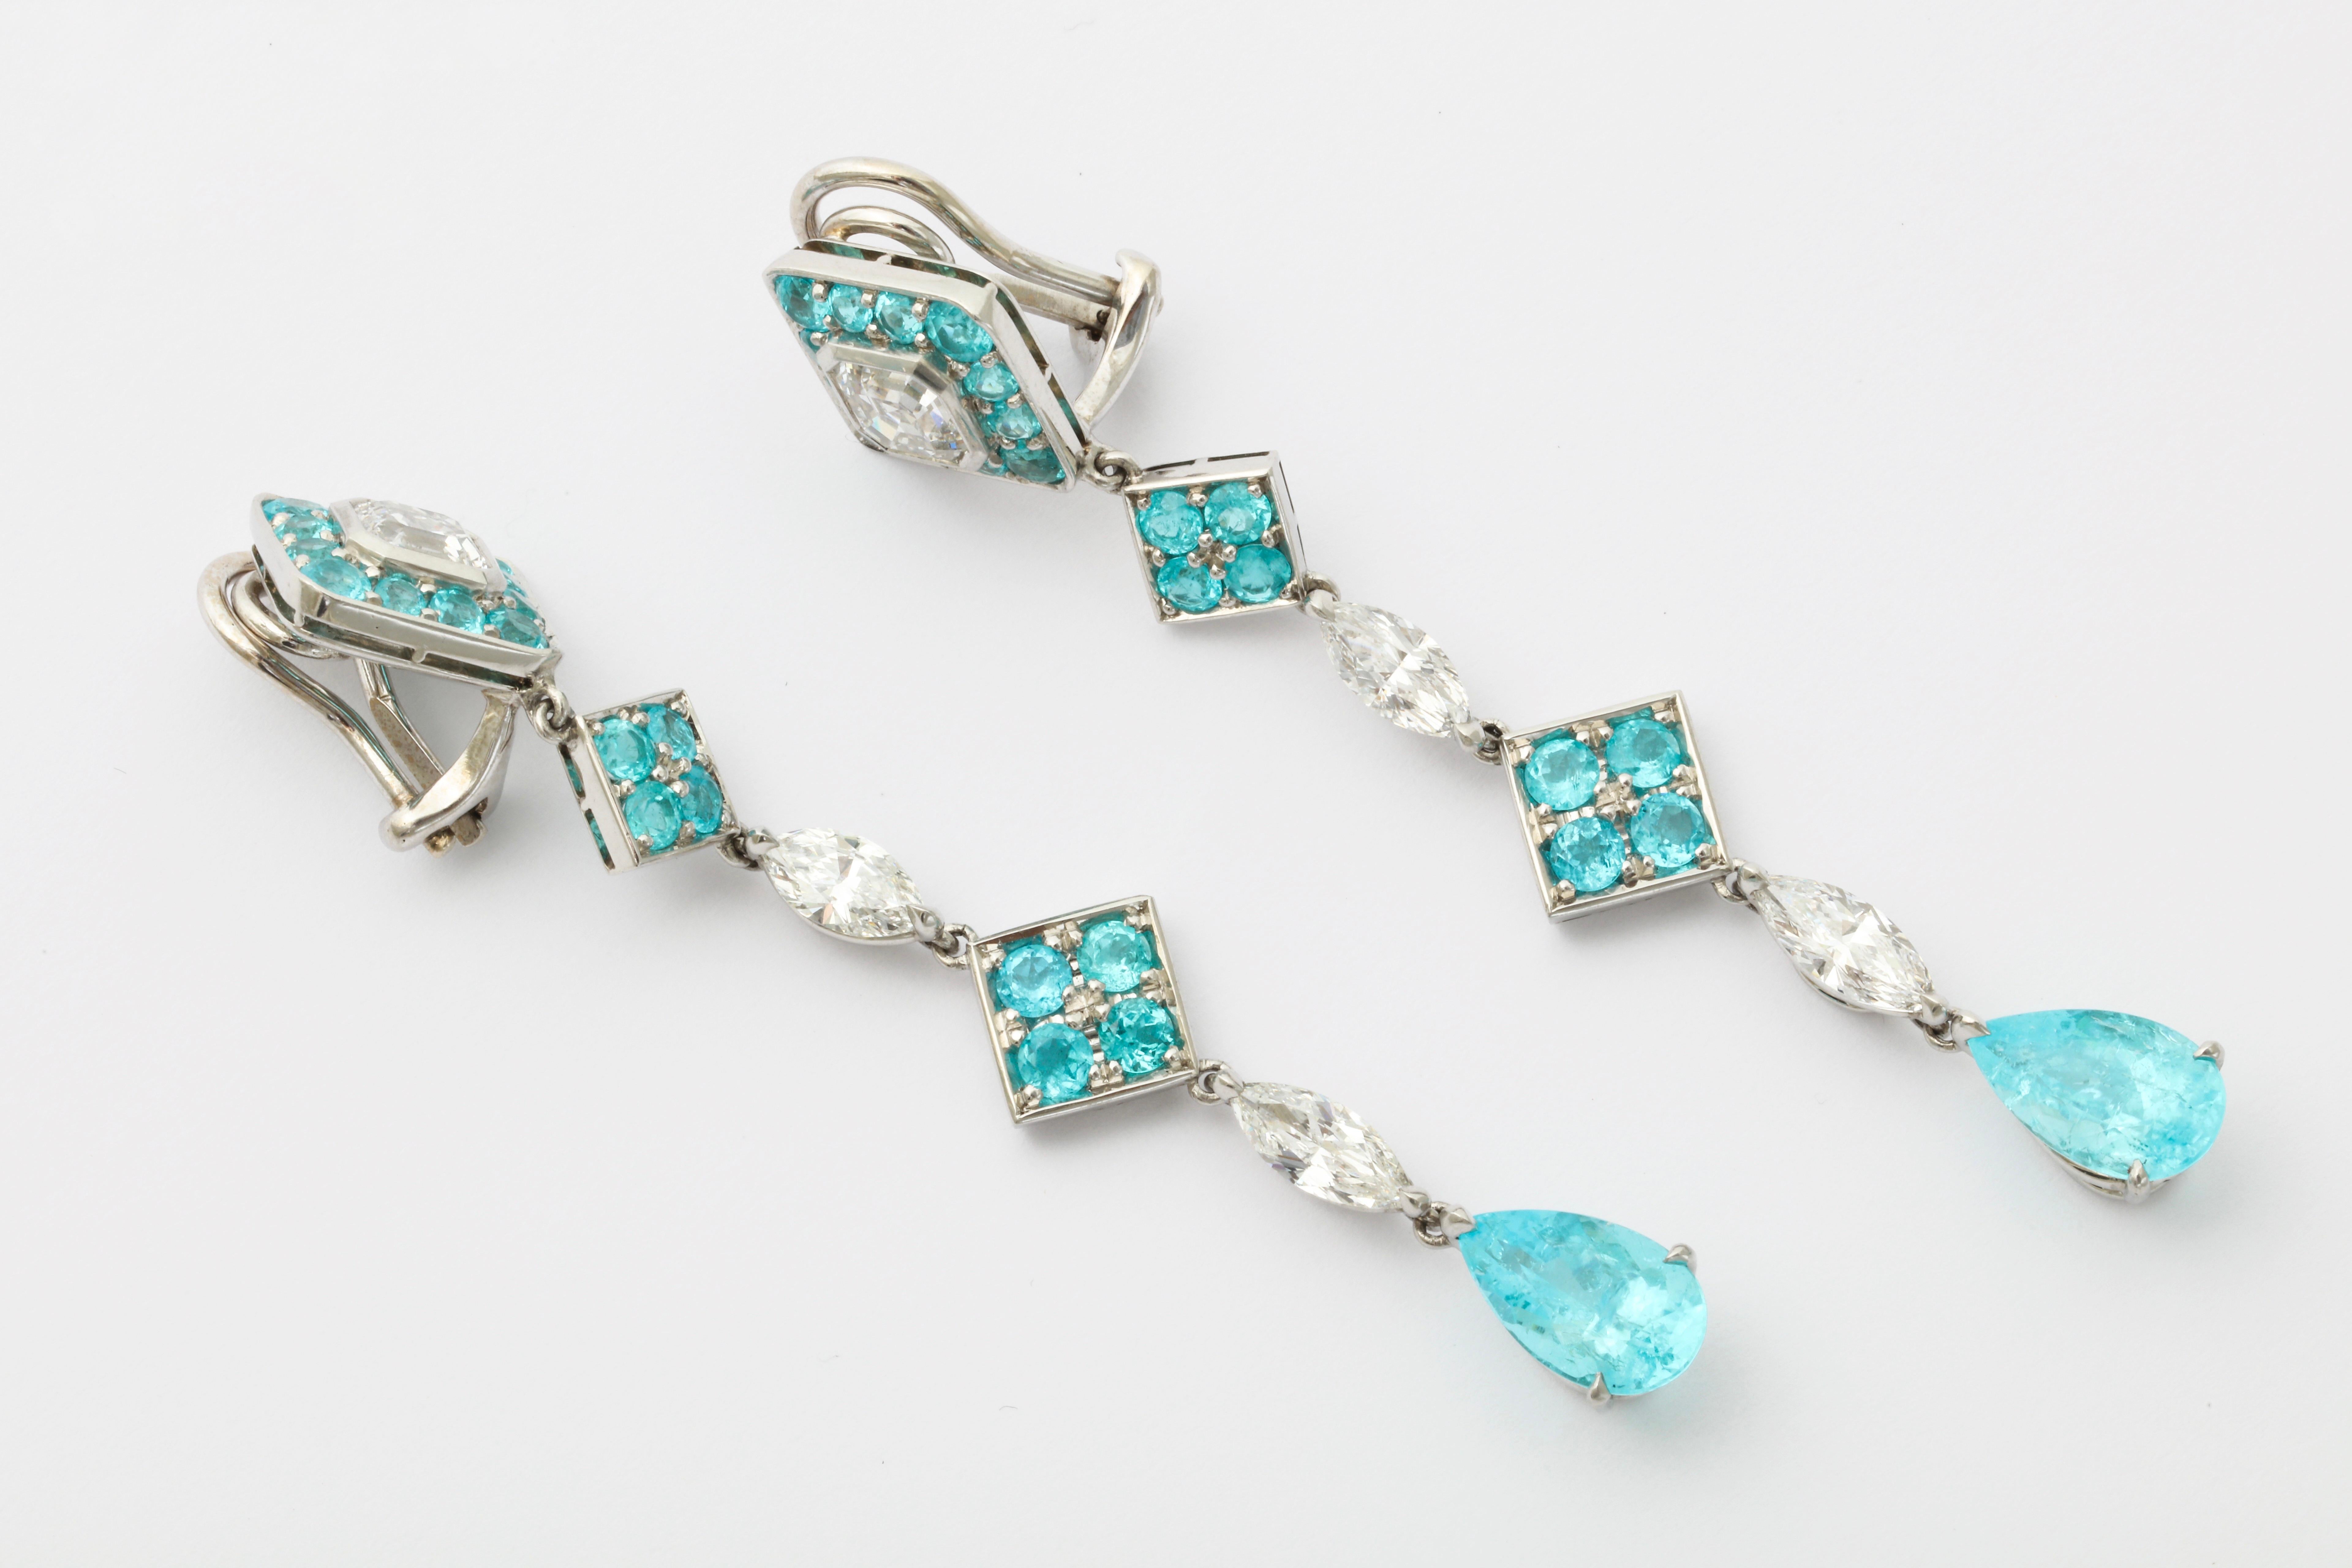 The quintessential shoulder duster earrings, featuring the most sought after tourmalines from Paraiba, Brazil.  The matching pear shape Paraibas are mounted with very high quality emerald cut and marquise diamonds as well as smaller round Paraibas. 